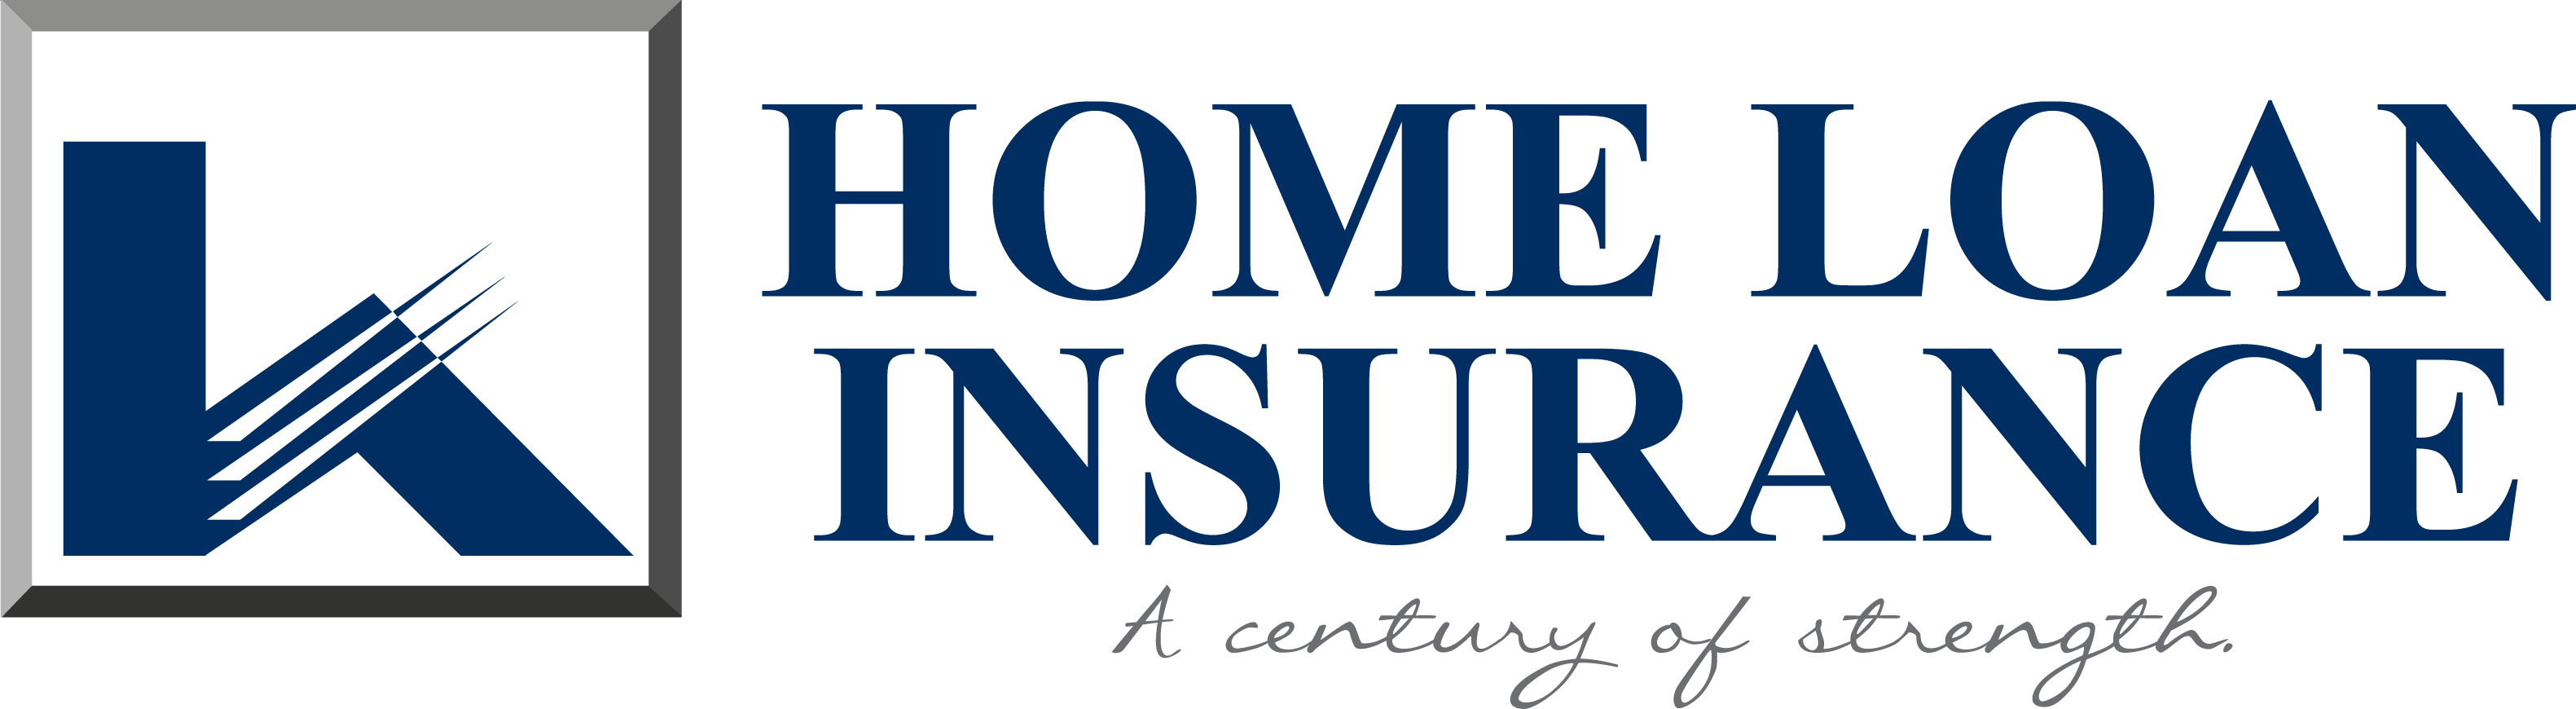 Home Loan & Investment Co. logo